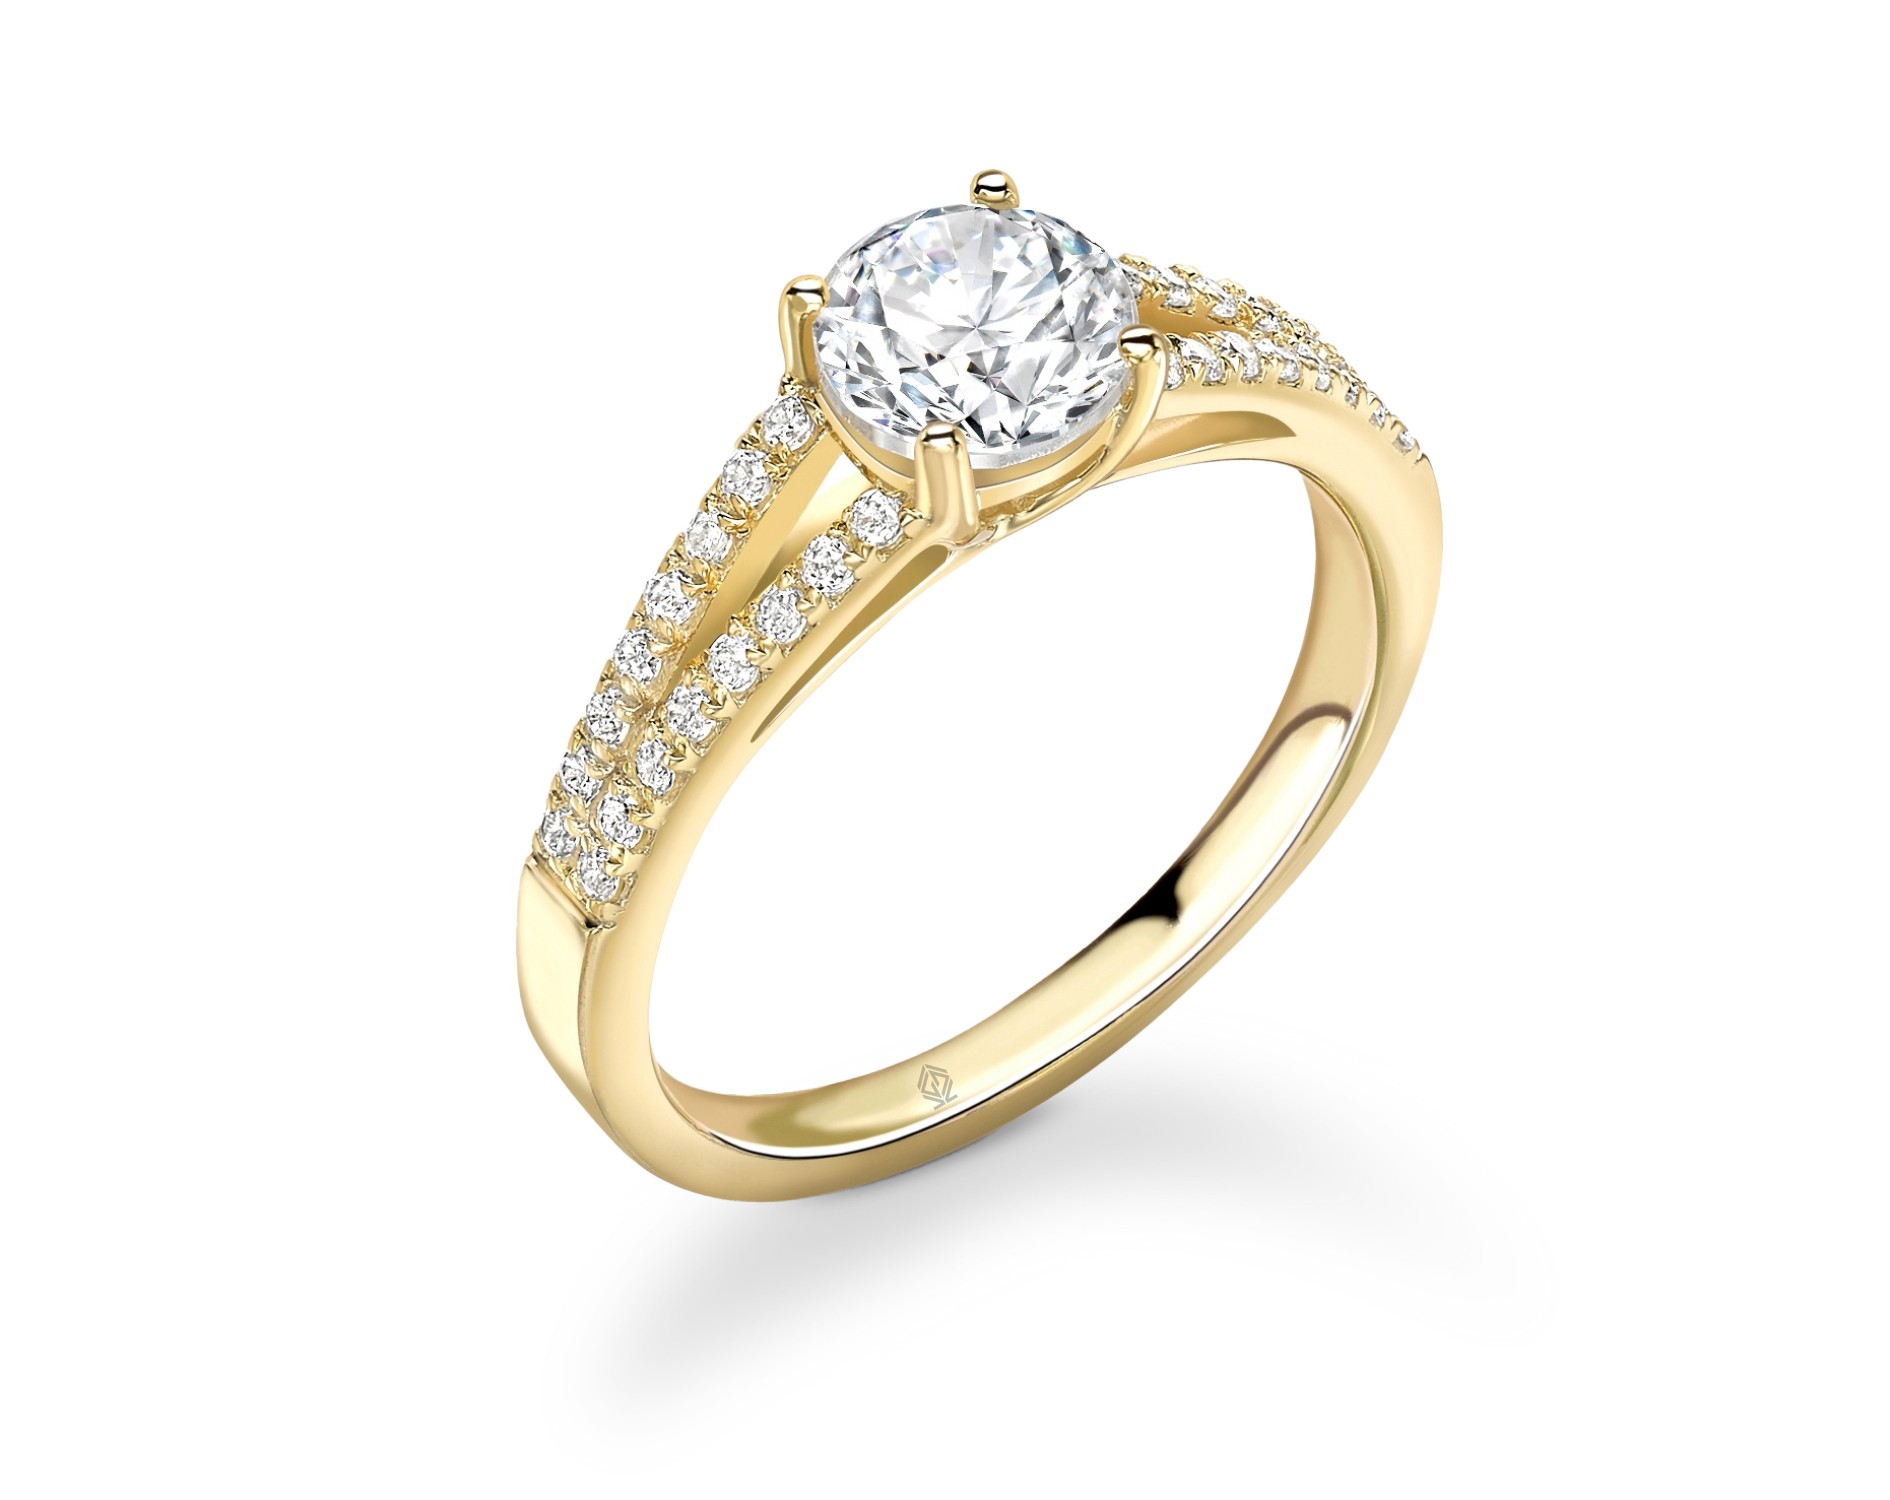 18K YELLOW GOLD ROUND CUT DIAMOND ENGAGEMENT WITH SPLIT SHANK AND SIDE STONES PAVE SET